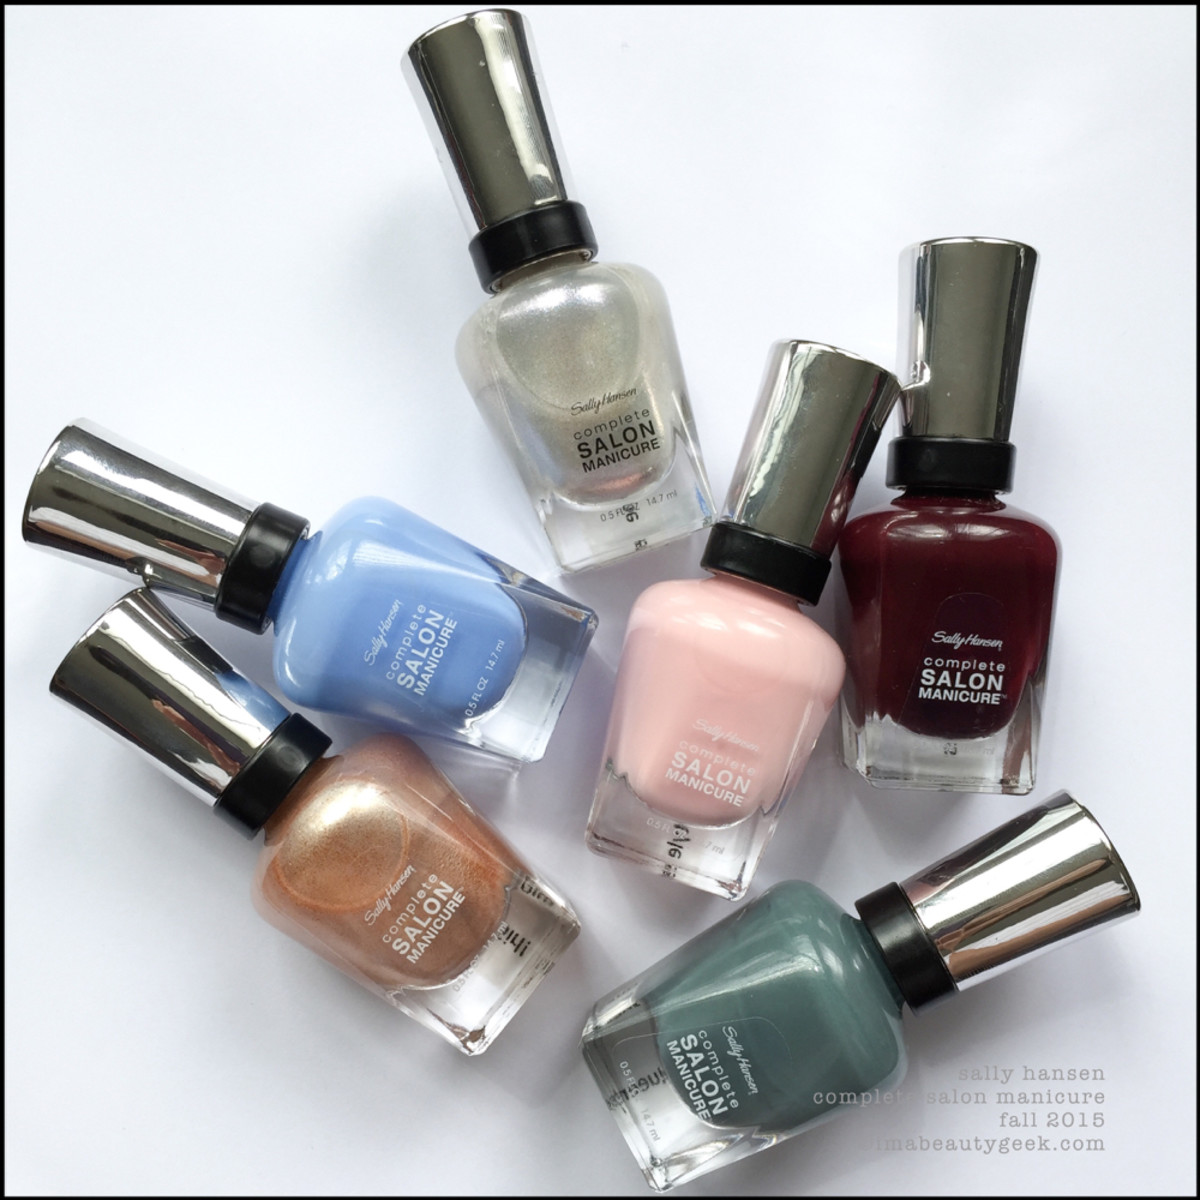 Sally Hansen Complete Salon Manicure Fall 2015 Swatches Review _ 2